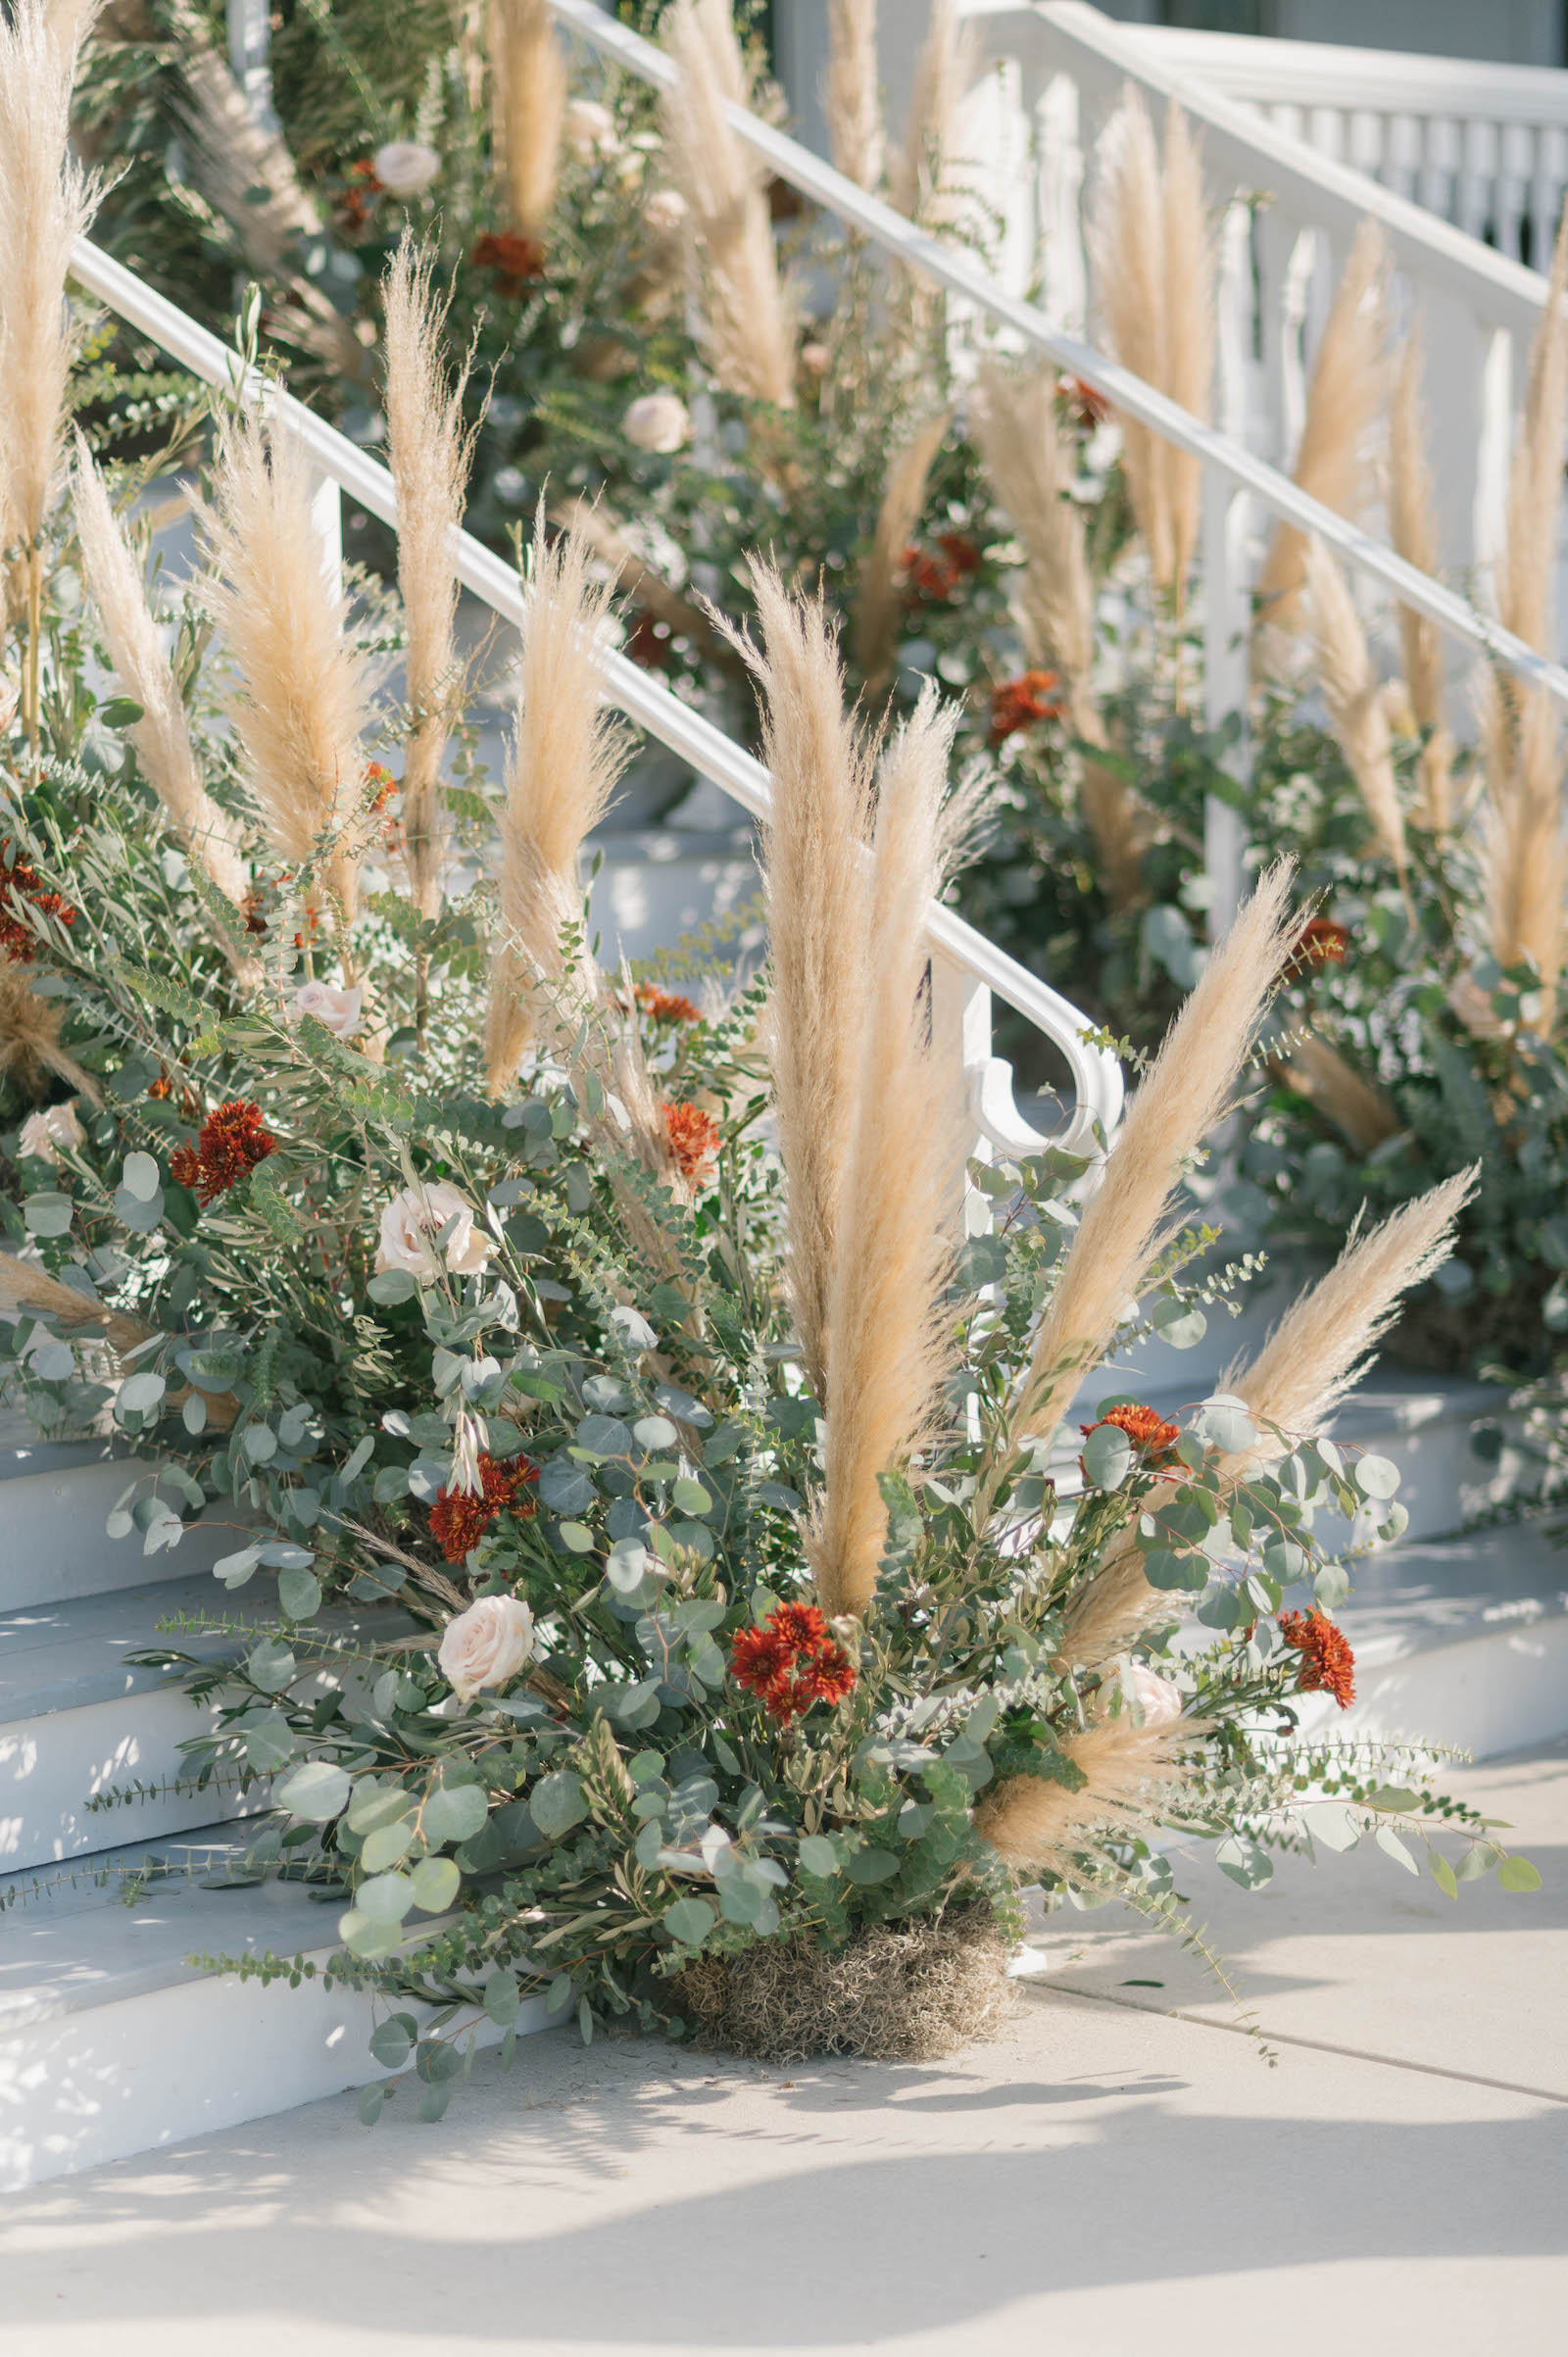 Boho Garden Wedding Ceremony Decor, Greenery Eucalyptus, Red Flowers, Blush Pink Roses, Pampas Grass Lush Floral Arrangements Lining Staircase